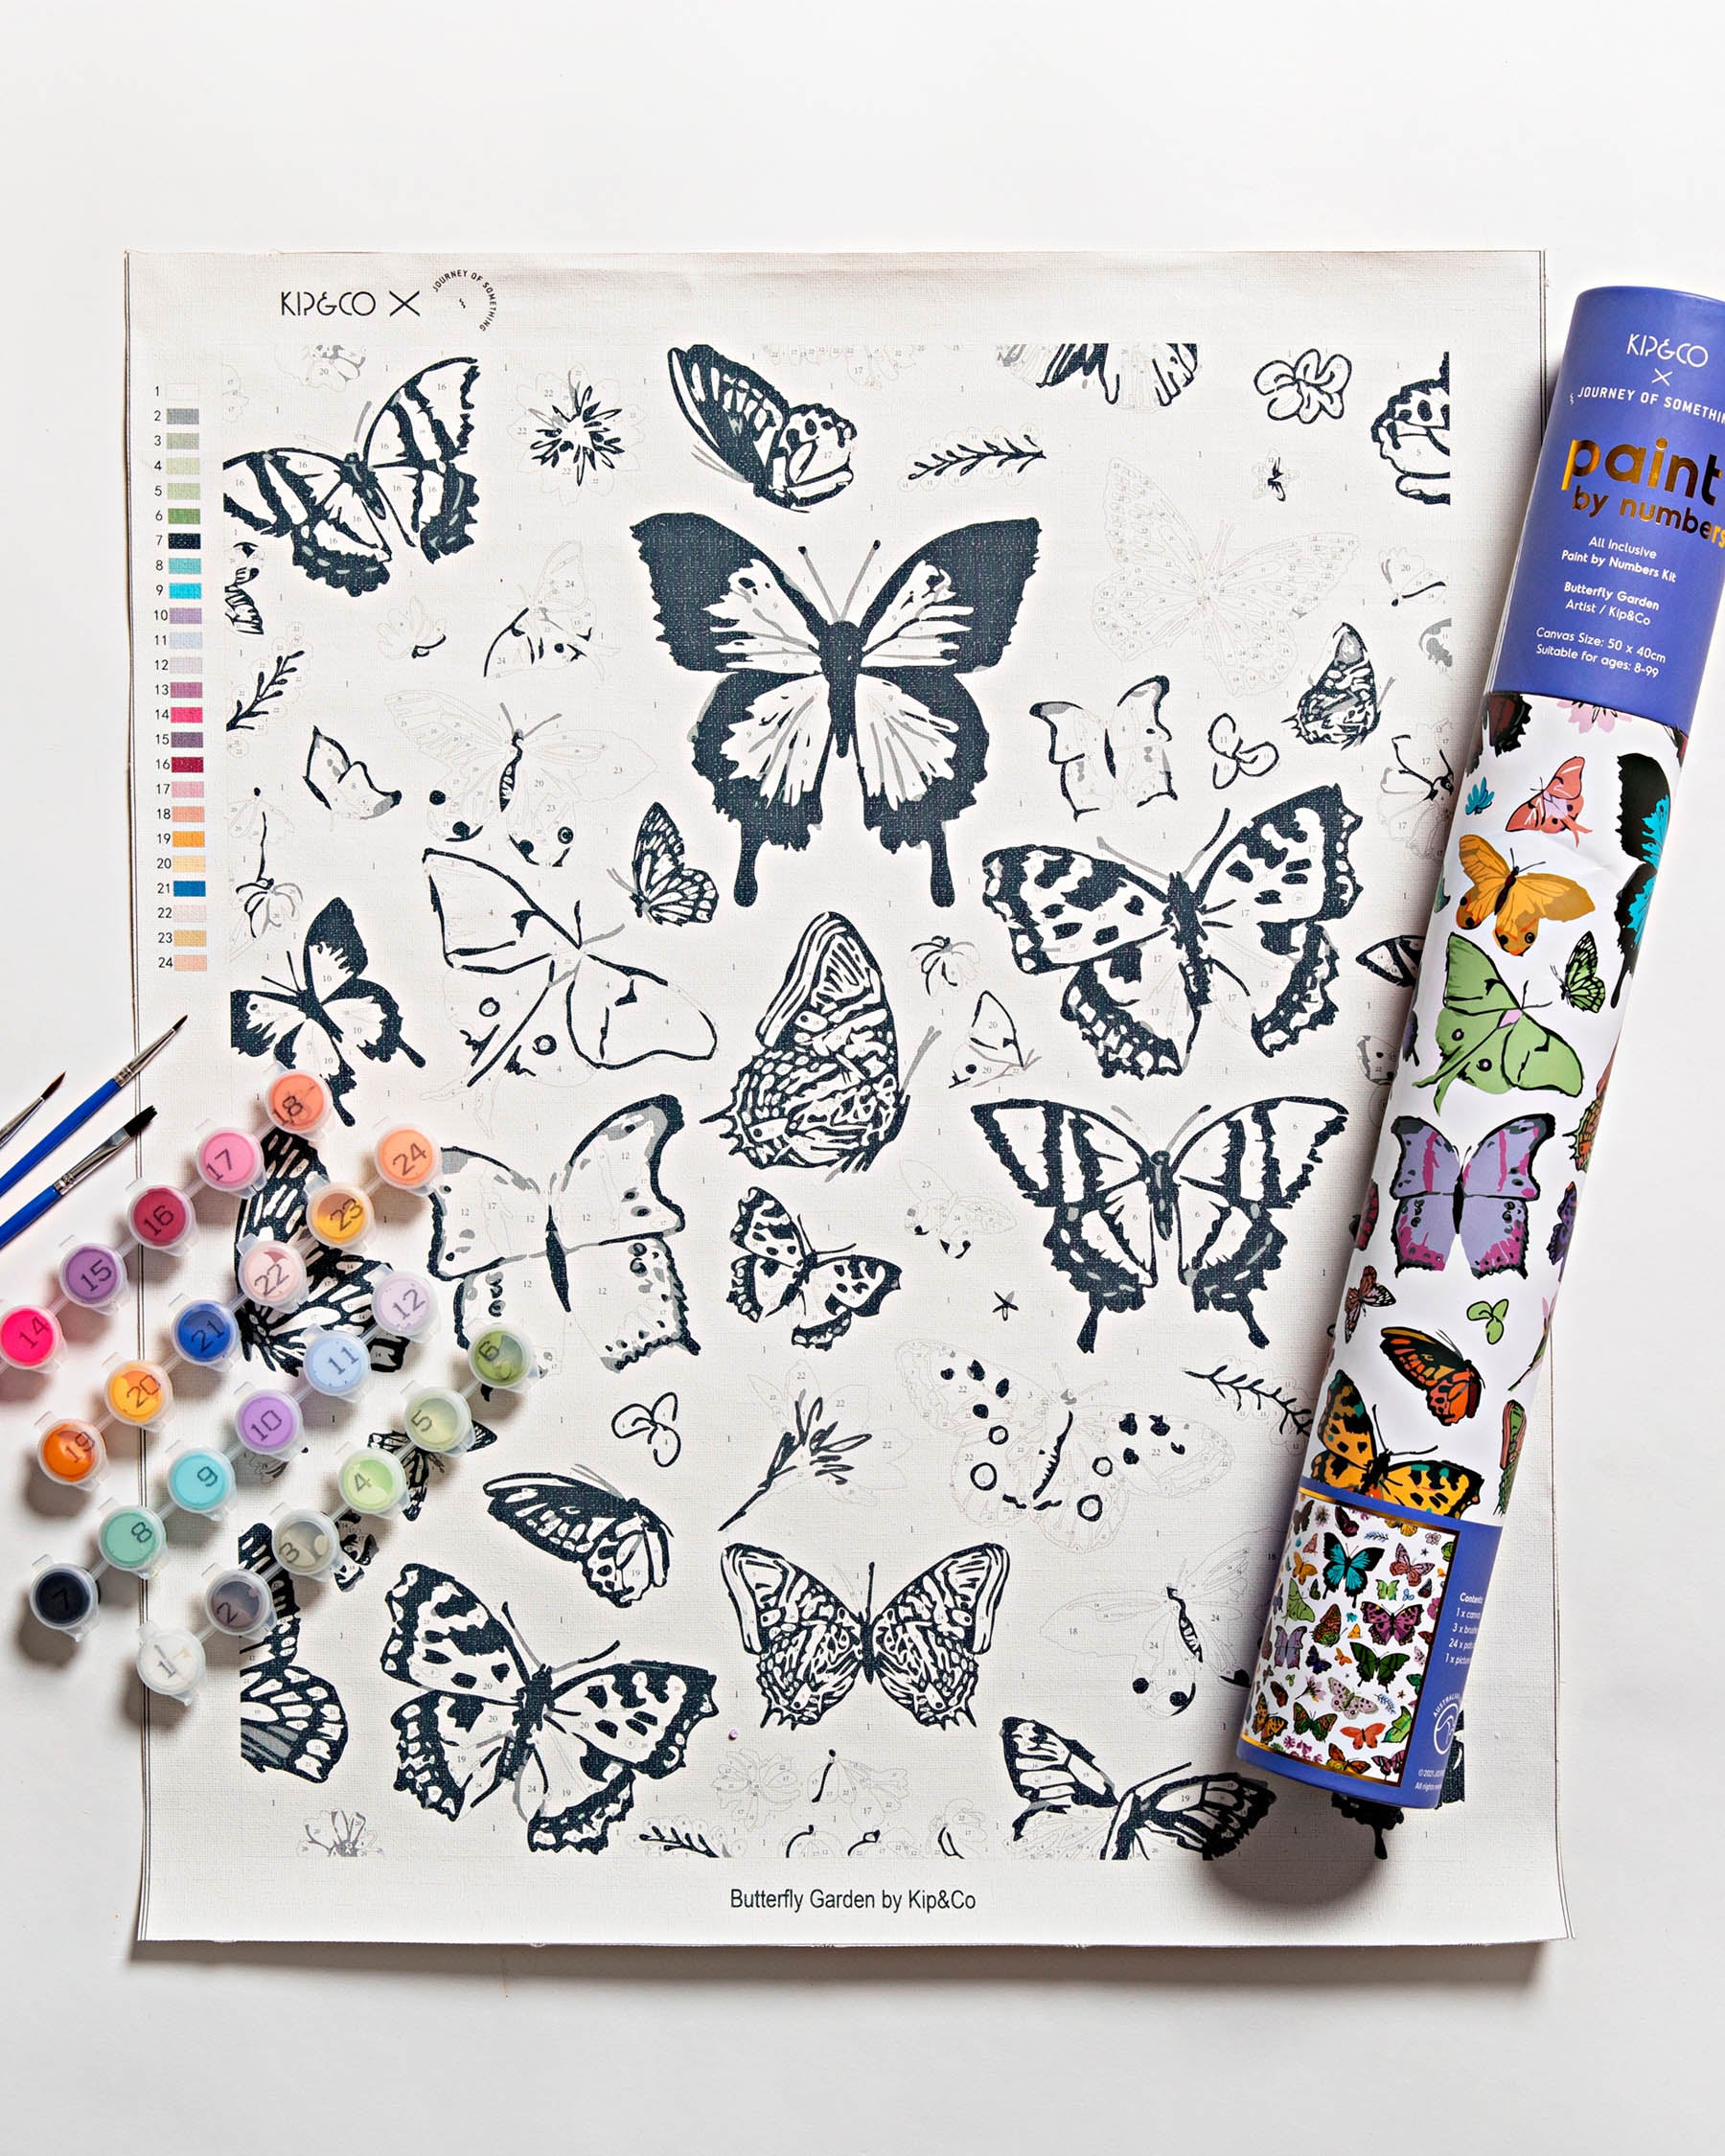 Kip&Co X Journey Of Something Butterfly Garden Adult Paint By